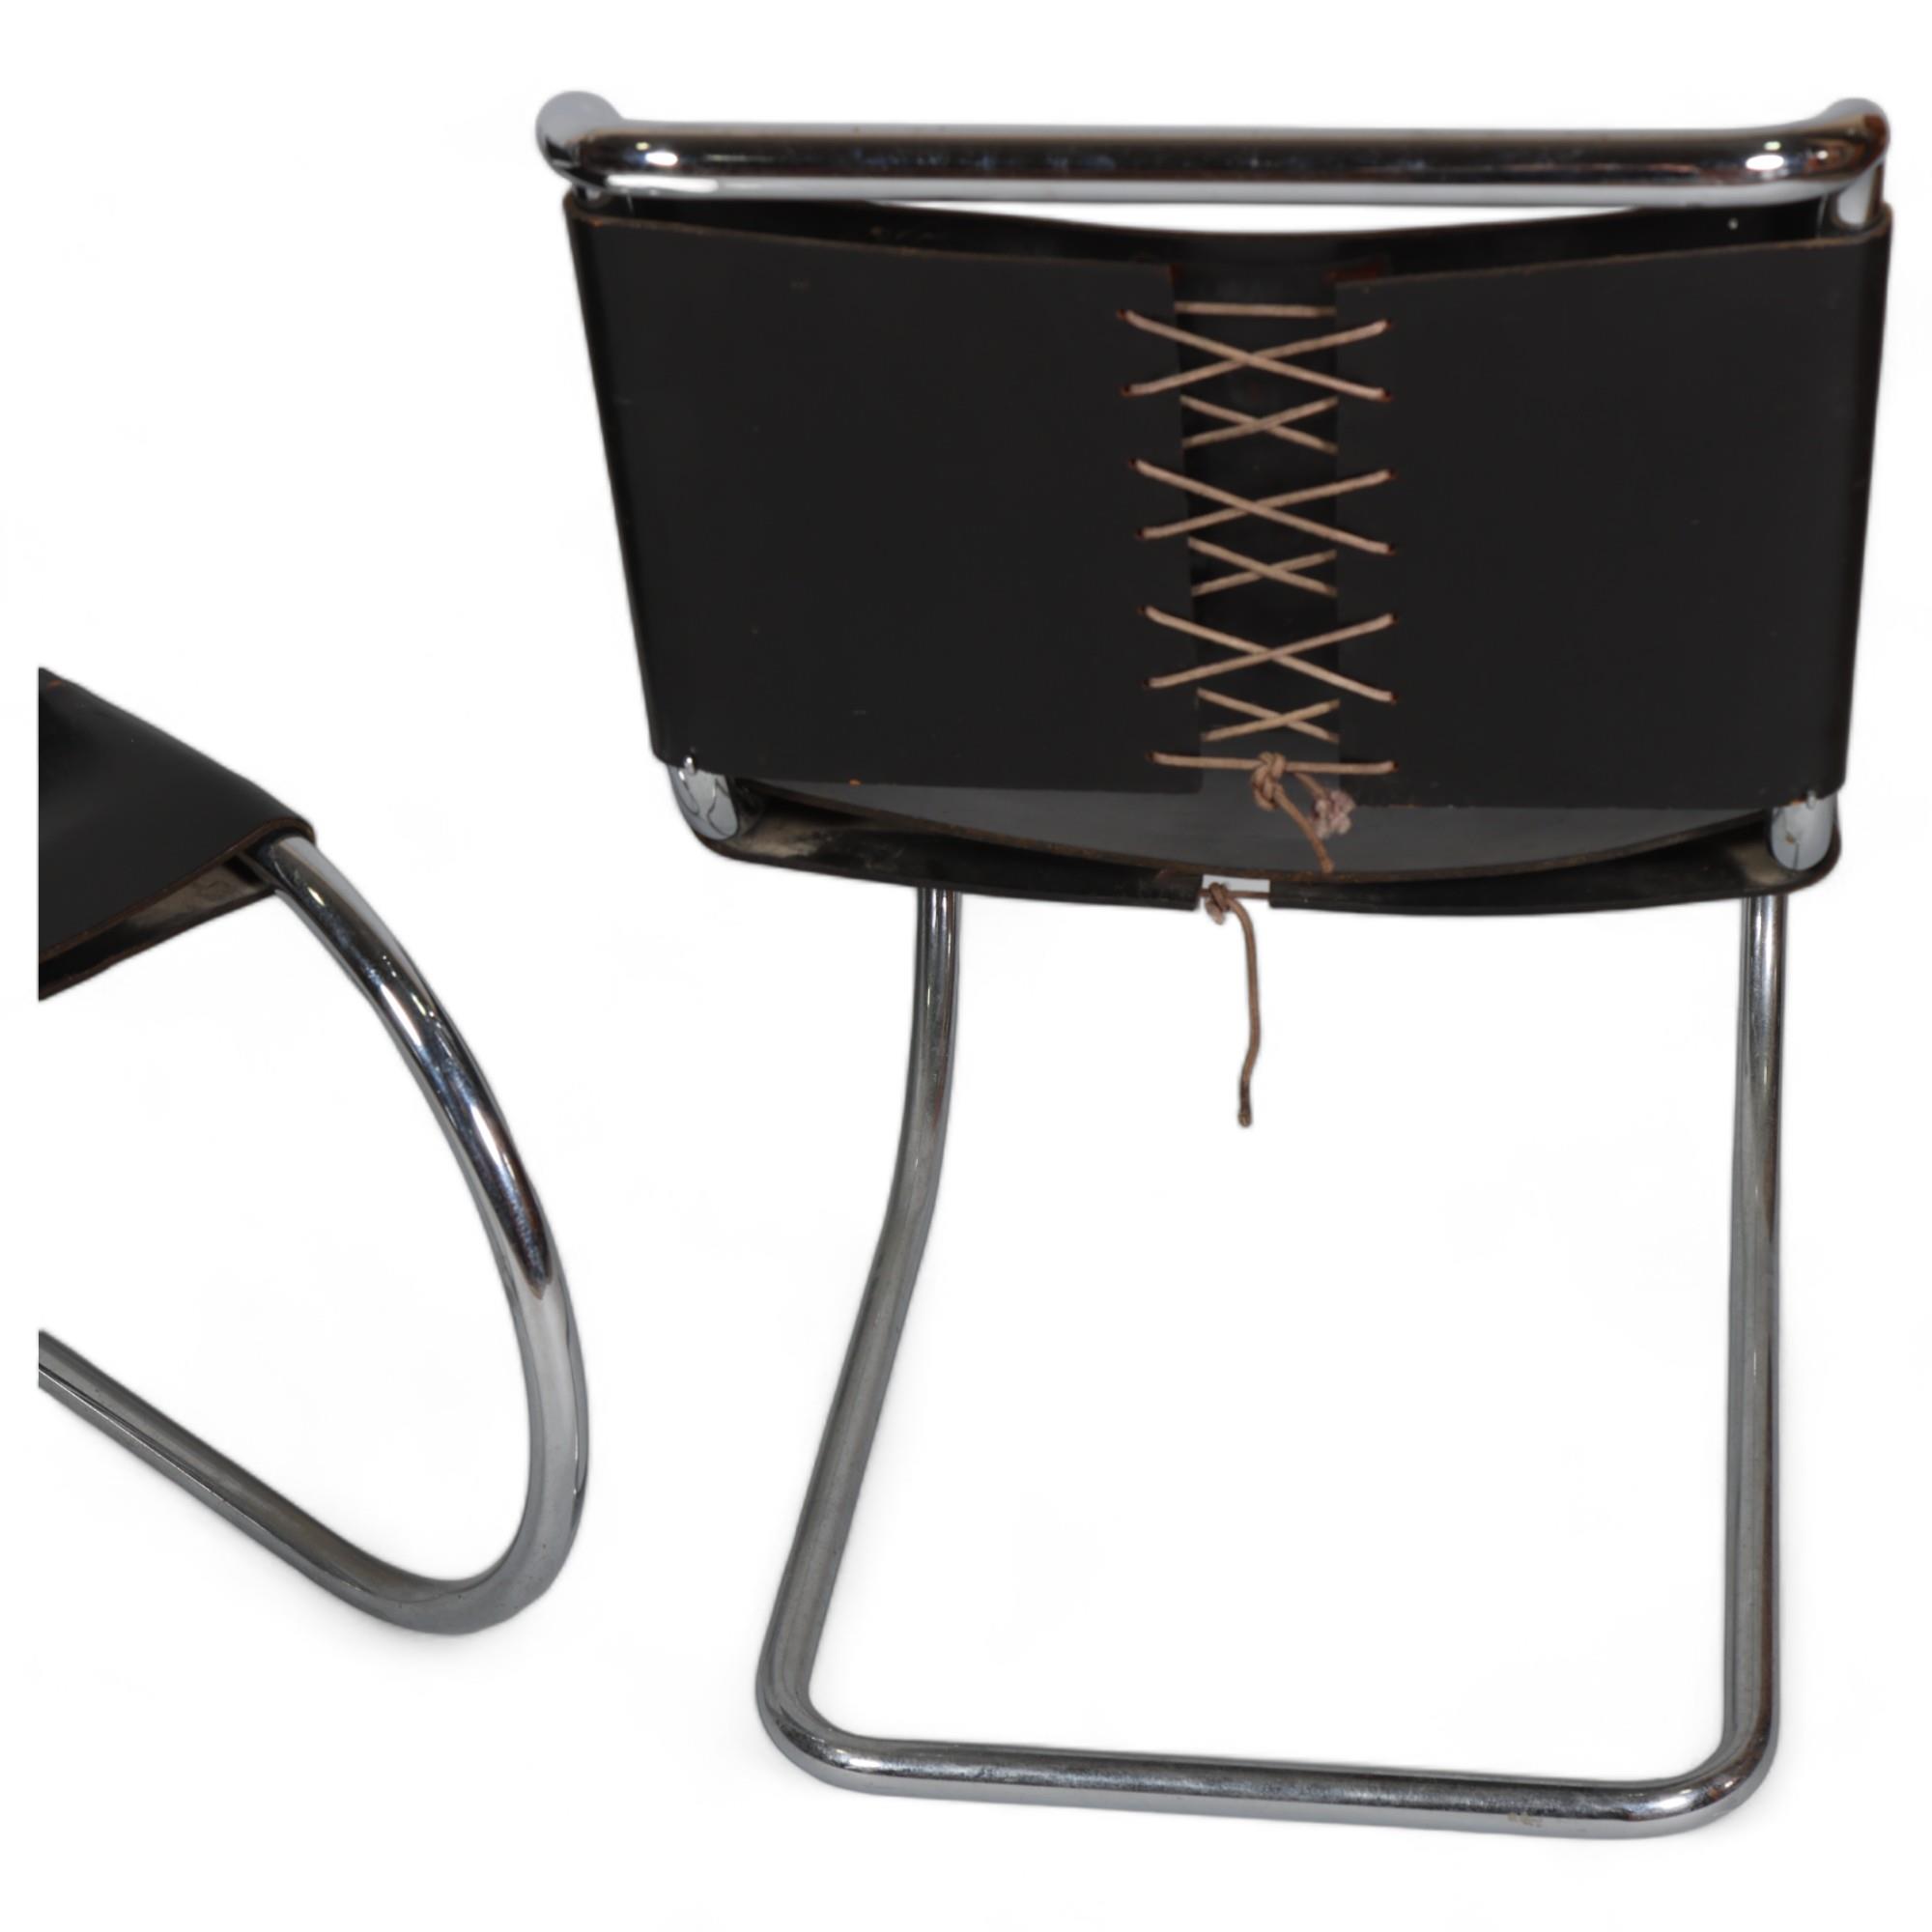 MIES VAN DER ROHE for KNOLL - an early pair of MR10 cantilever tubular steel side chairs with - Image 2 of 5